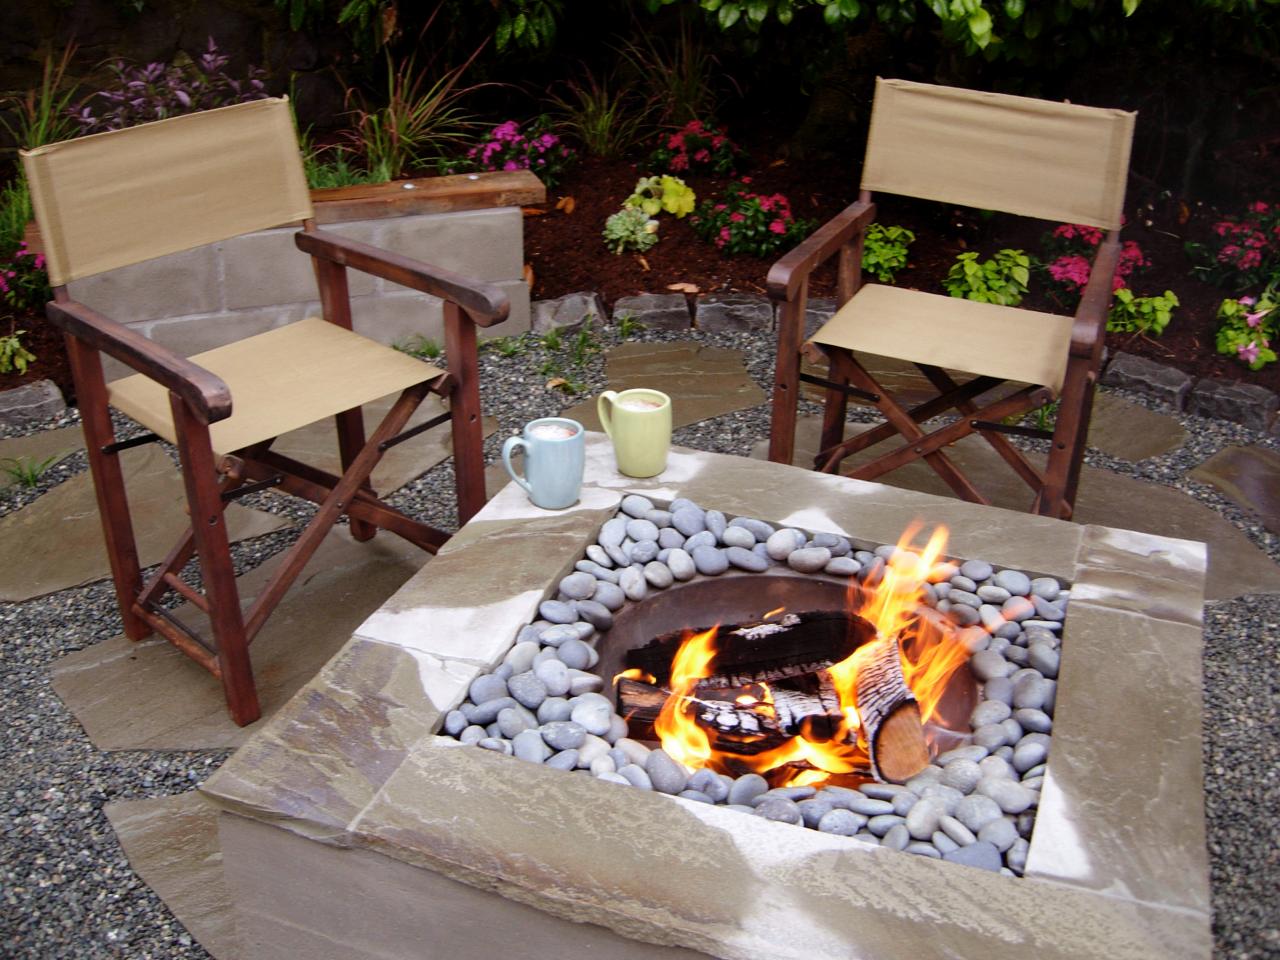 How To Make A Concrete Fire Feature, Above Ground Fire Pit Diy